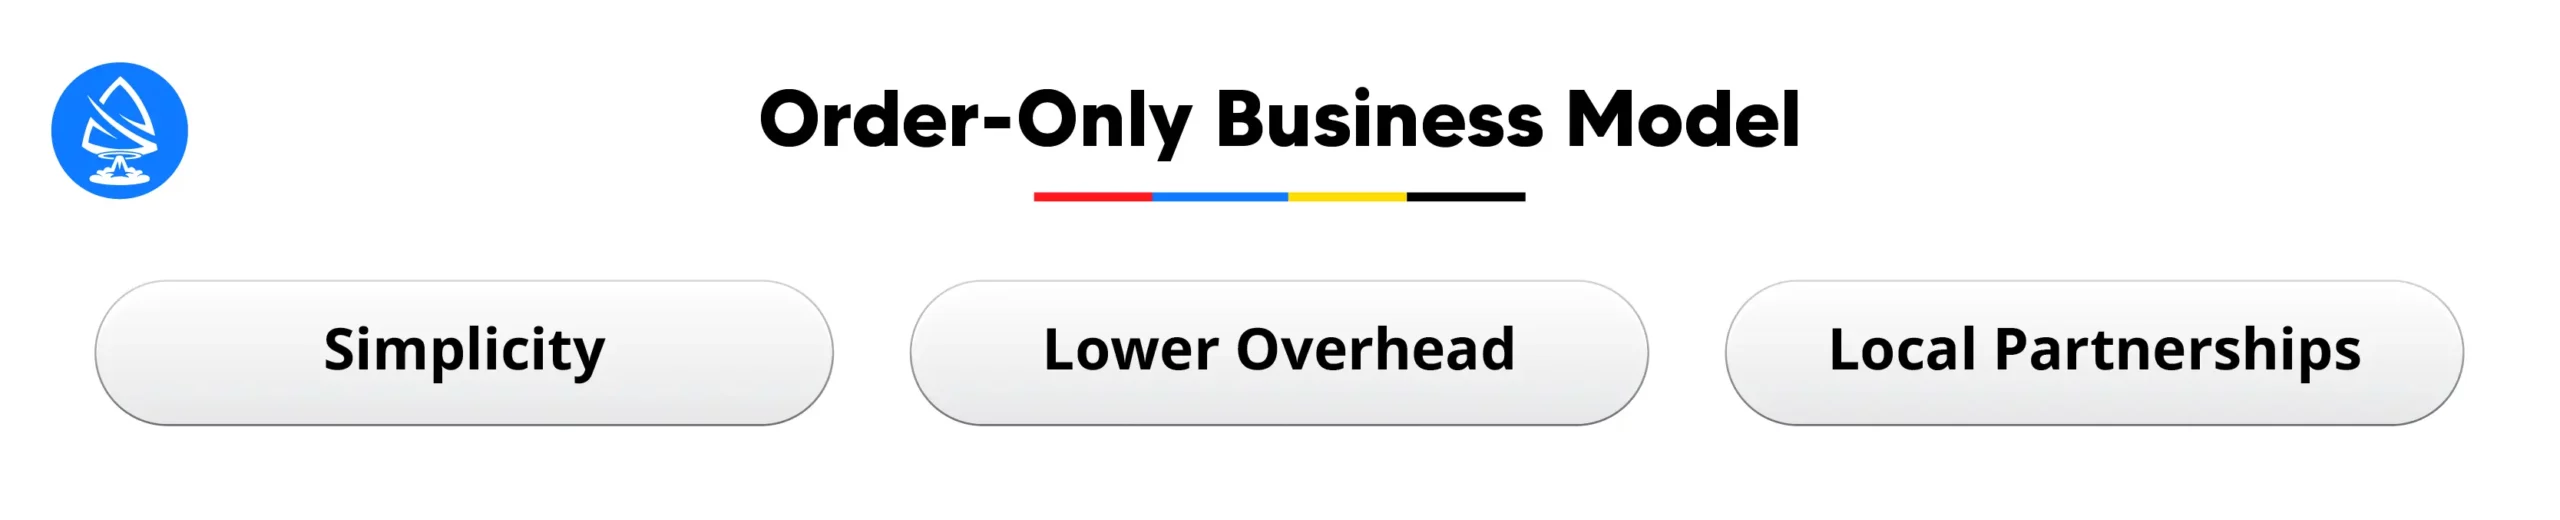 Order-Only Business Model